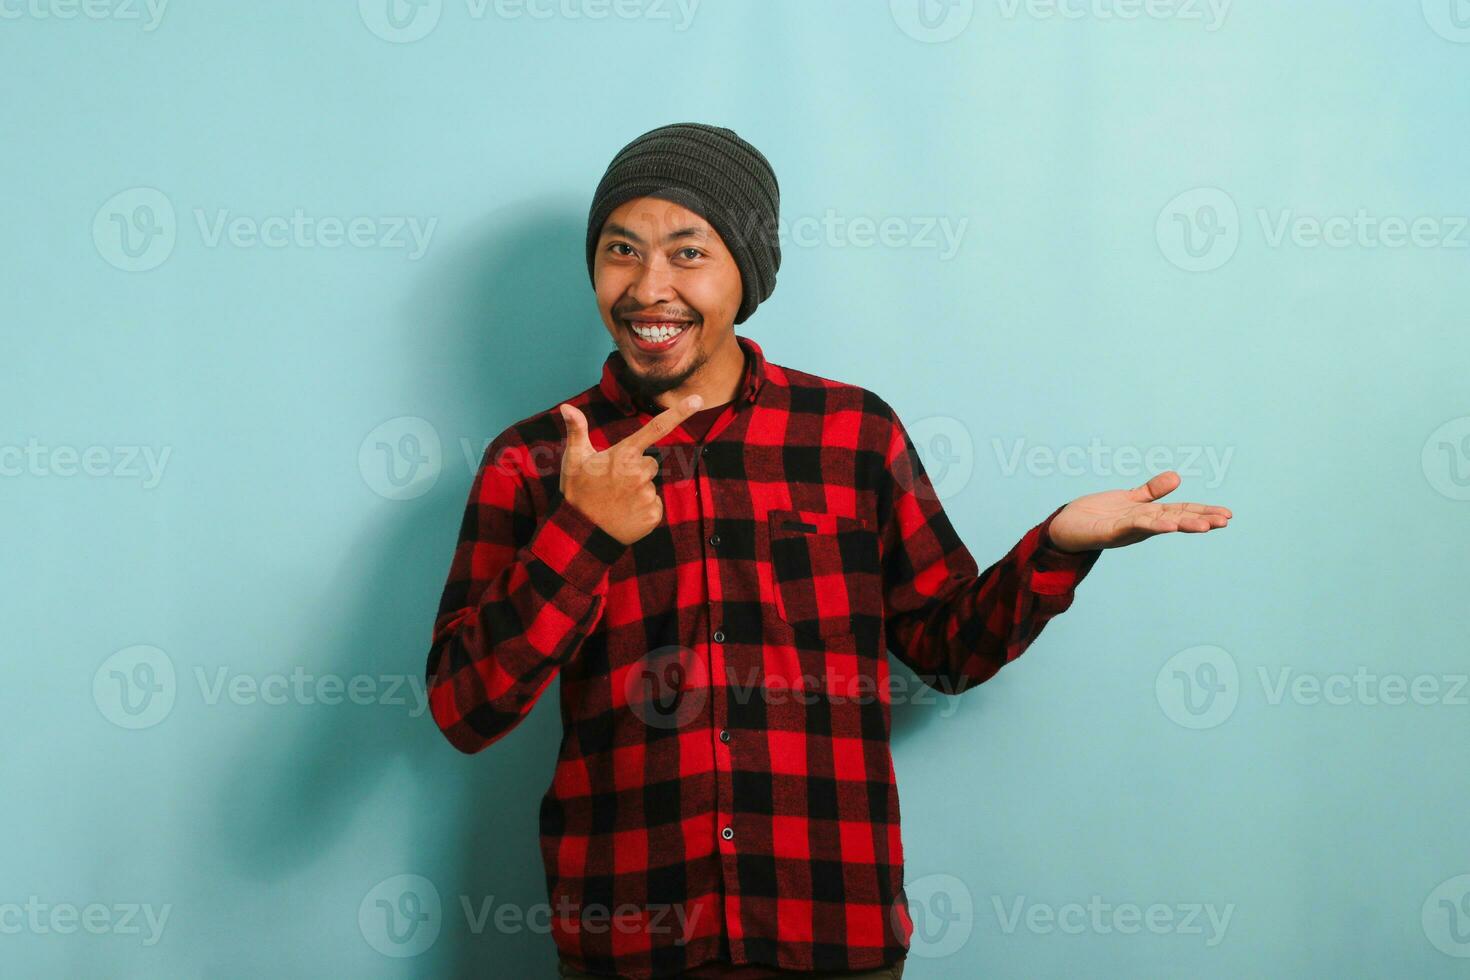 Excited Young Asian man with a beanie hat and a red plaid flannel shirt is pointing his finger at an open palm, signaling a new product or sale presentation, isolated on a blue background photo